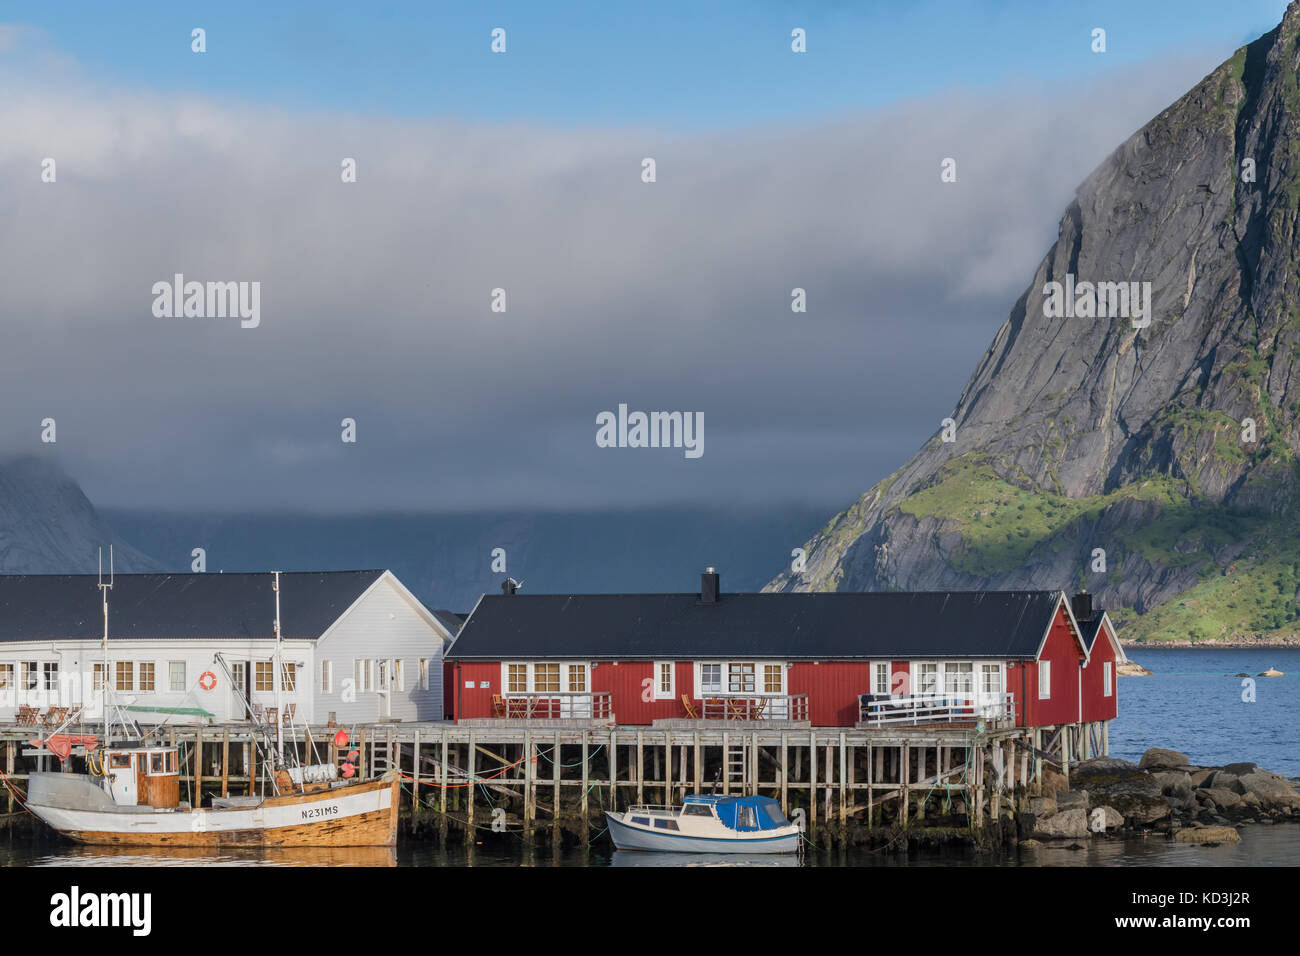 Traditional fisherman rorbu, cottage, huts in Lofoten Islands. Majestic mountains and clouds in the background Stock Photo